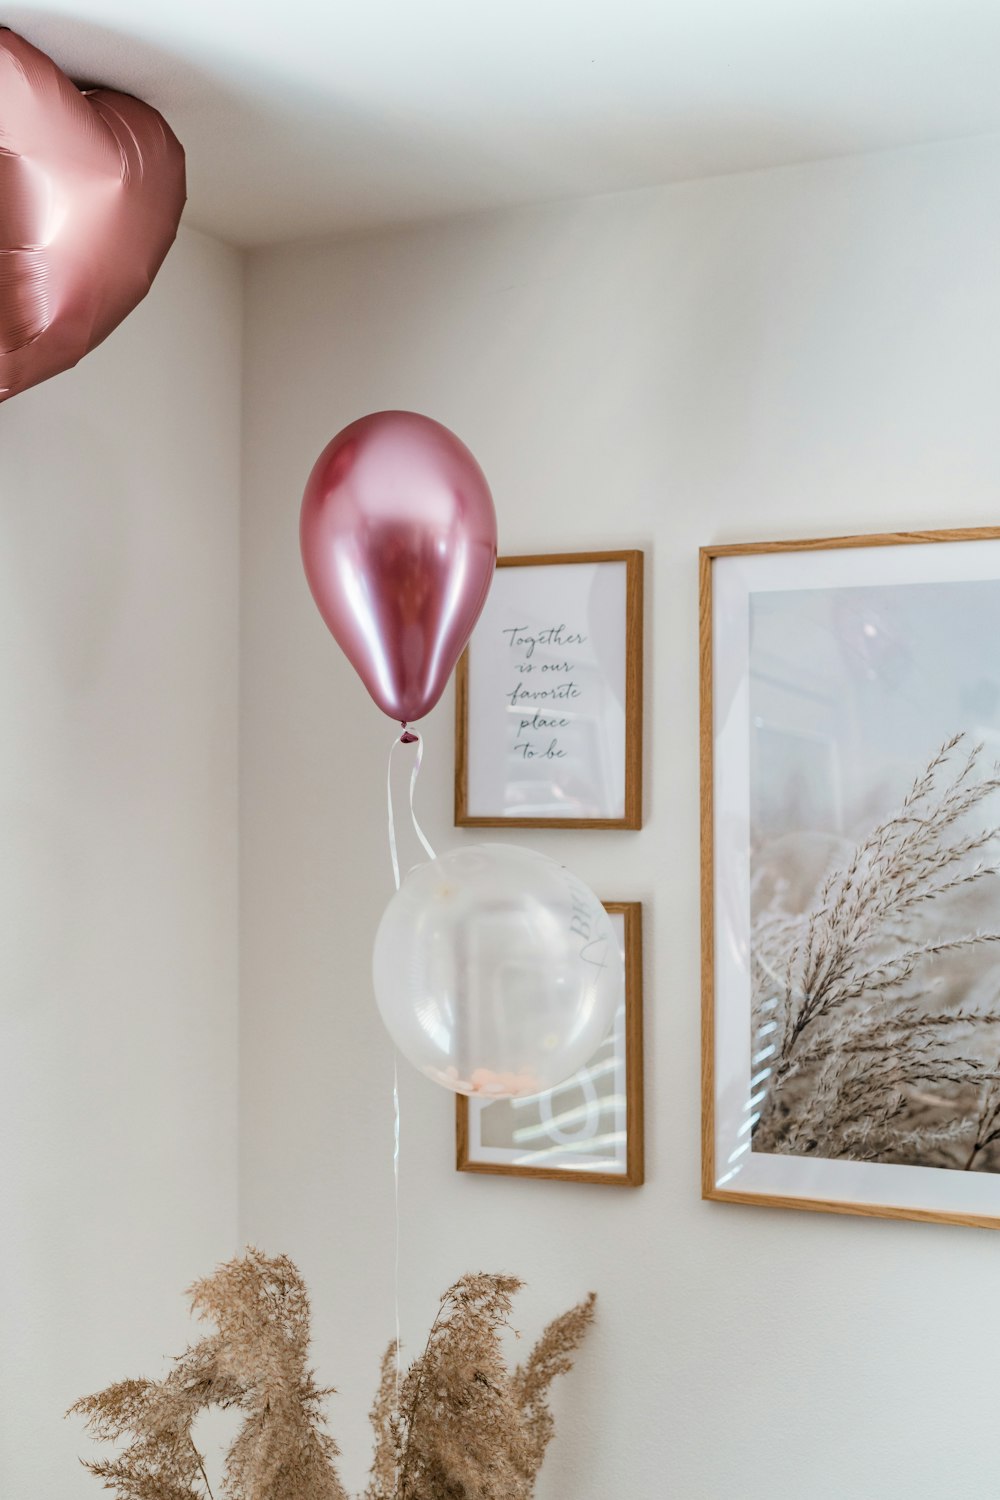 a vase filled with flowers next to two balloons